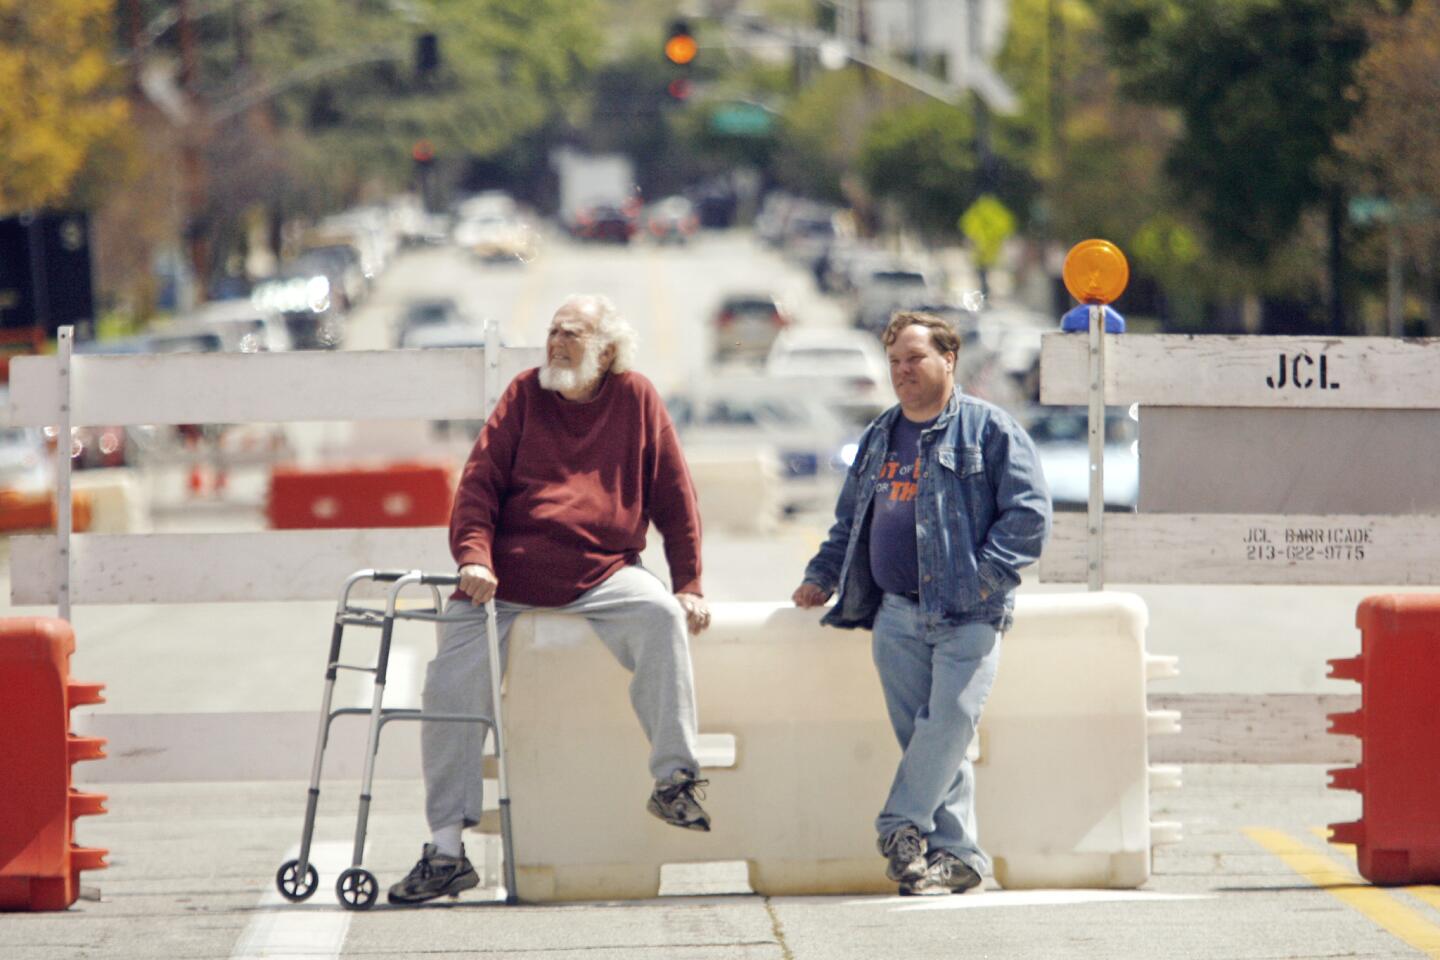 Charles Hodges, left, and Scott Stewart, watch participants in Burbank on Parade, which took place on Olive Ave. between Keystone St. and Lomita St. on Saturday, April 14, 2012.